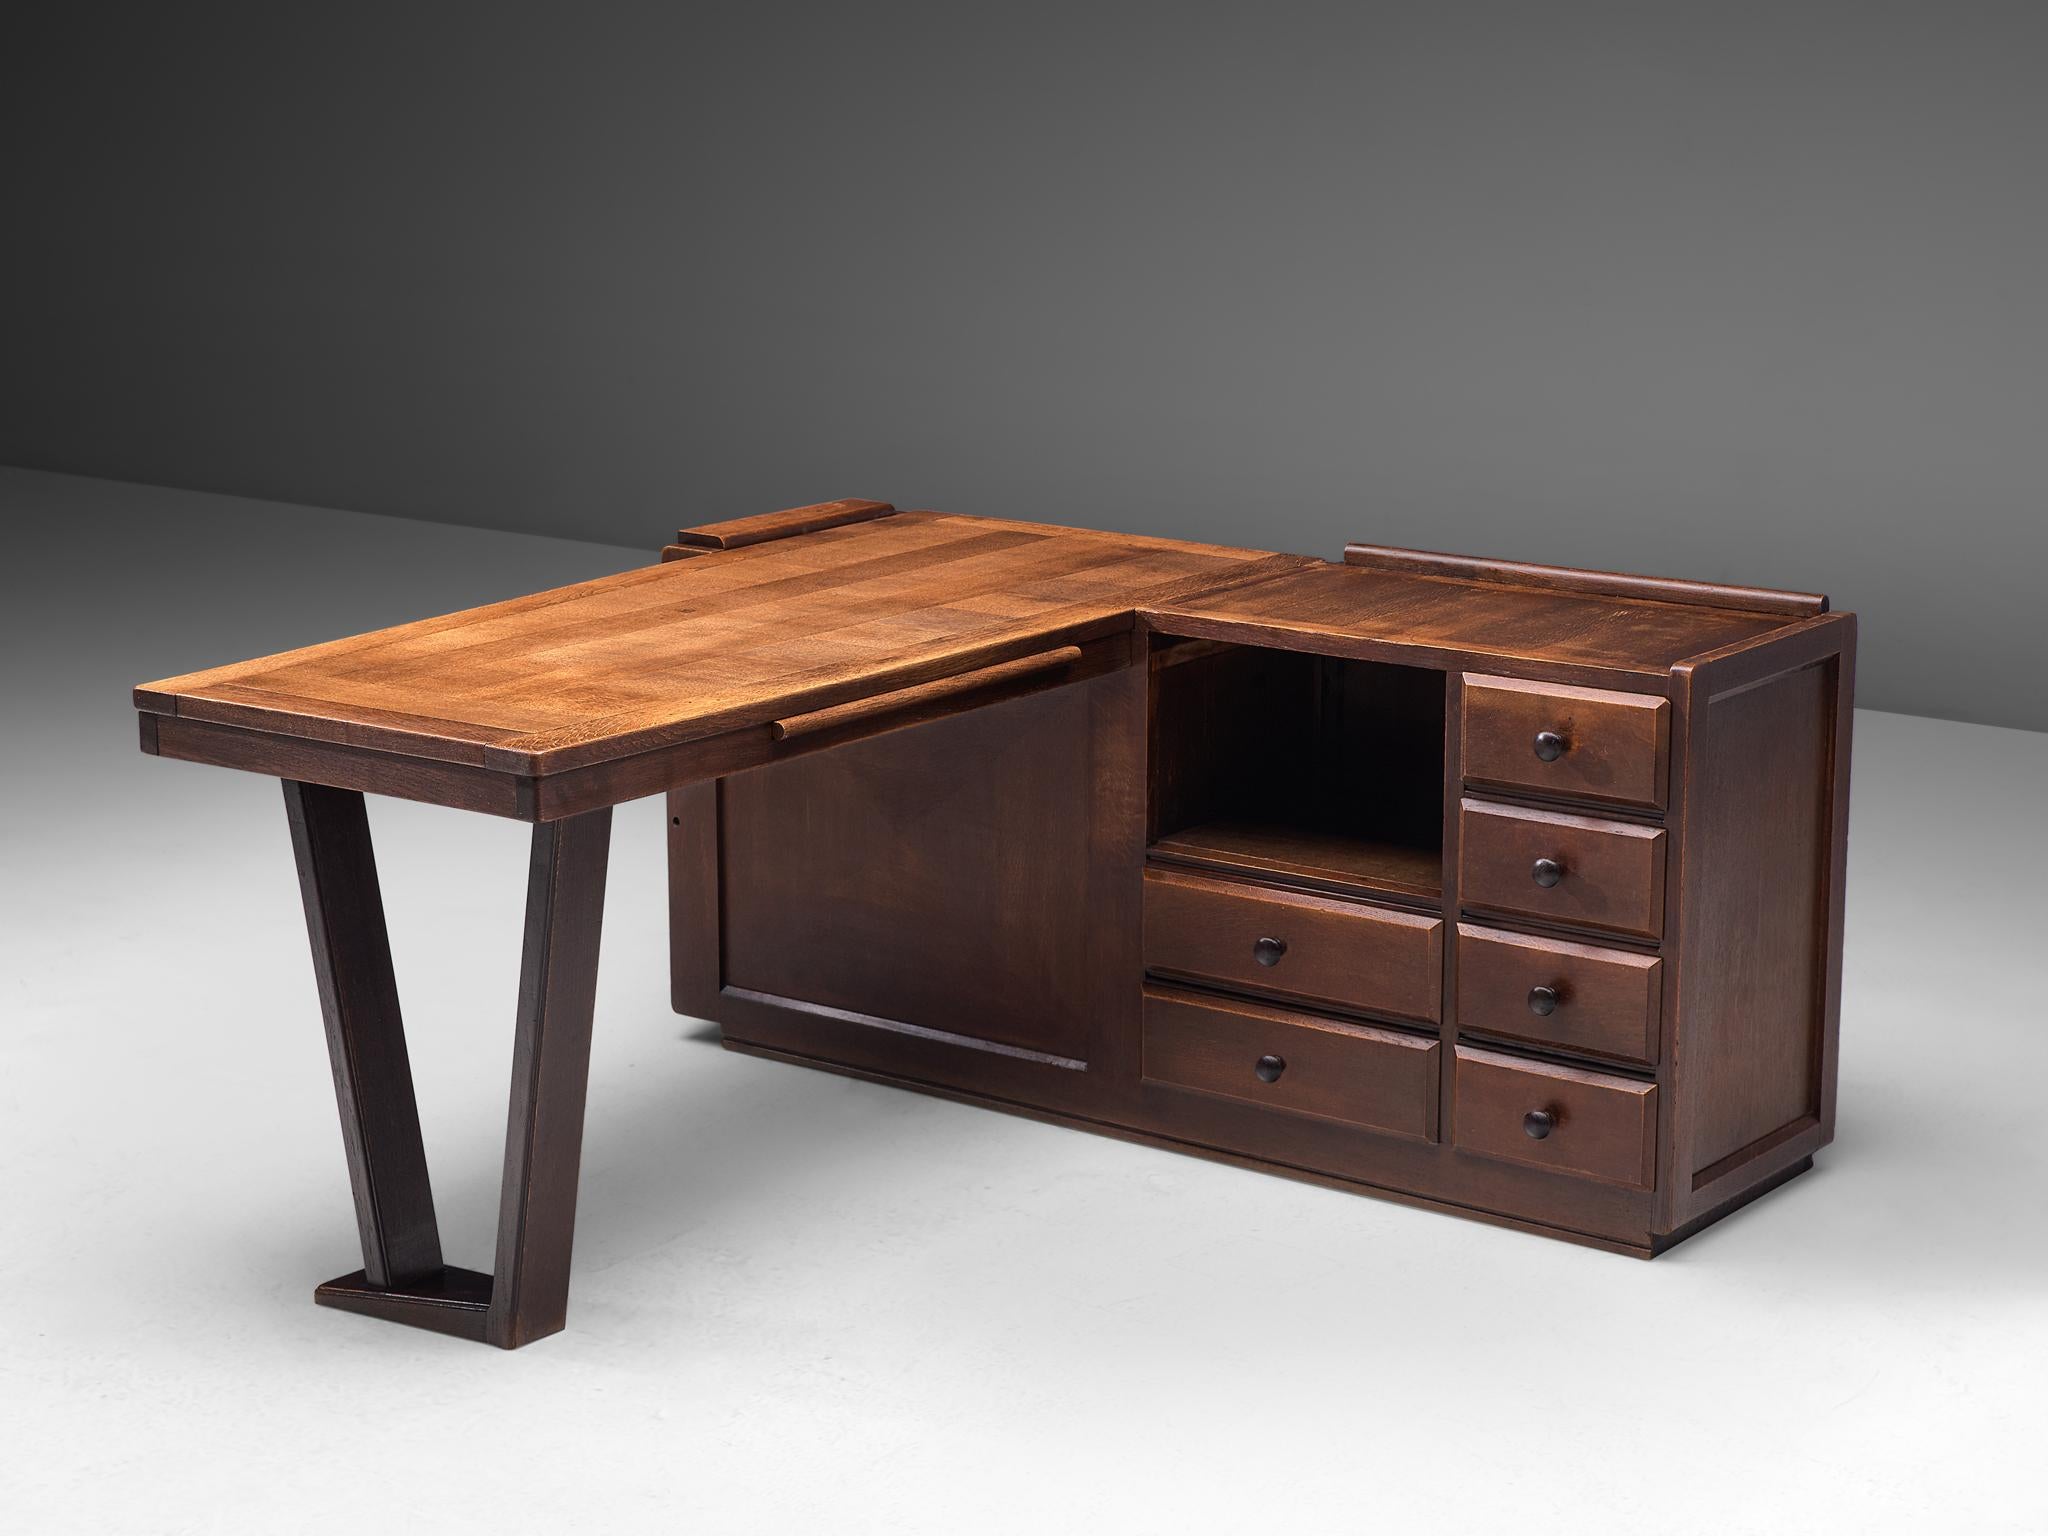 Guillerme & Chambron, corner desk, stained oak, France, 1950s

Corner desk by French designer duo Guillerme and Chambron. This executive desk shows the fine craftsmanship that characterizes the work of this designer duo. The desk consists out of